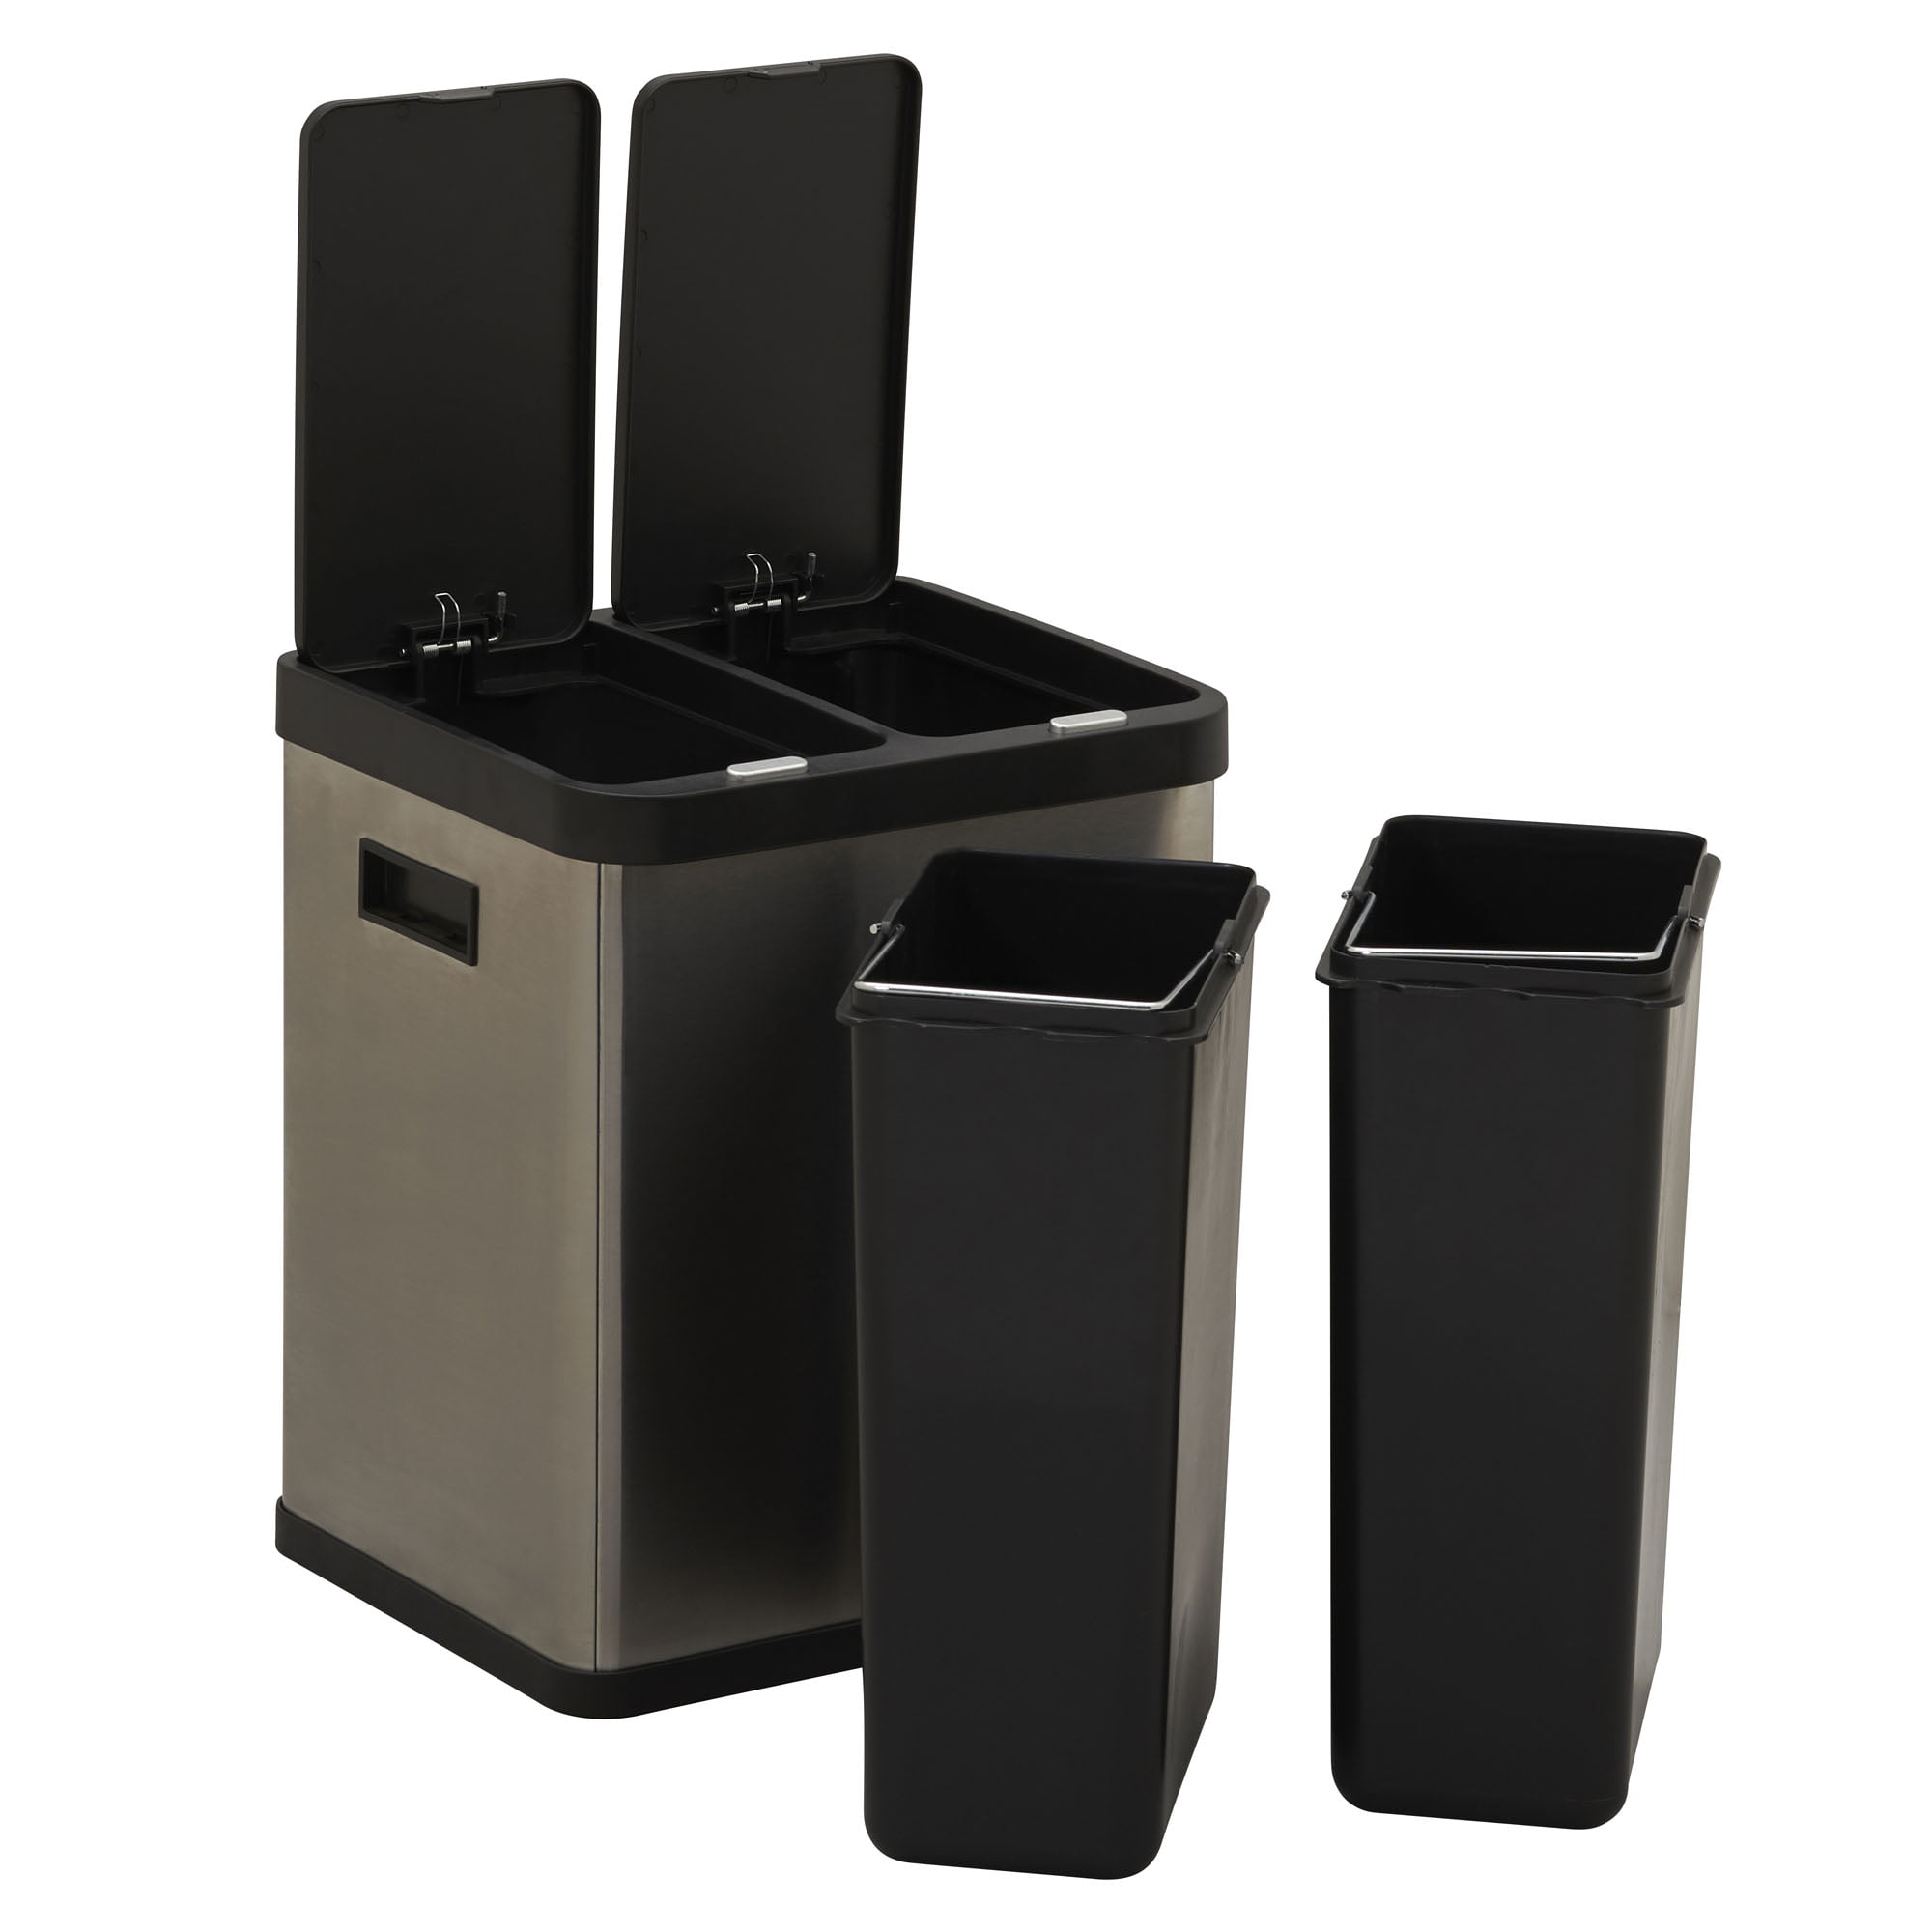  S AFSTAR Kitchen Trash Cans Dual Compartment, 2 x 8 Gal Garbage  Can W/2 Deodorizer Compartments, Soft Close Lids & Removable Buckets,  Brushed Stainless Steel Step Trash Bin for Kitchen Bathroom 